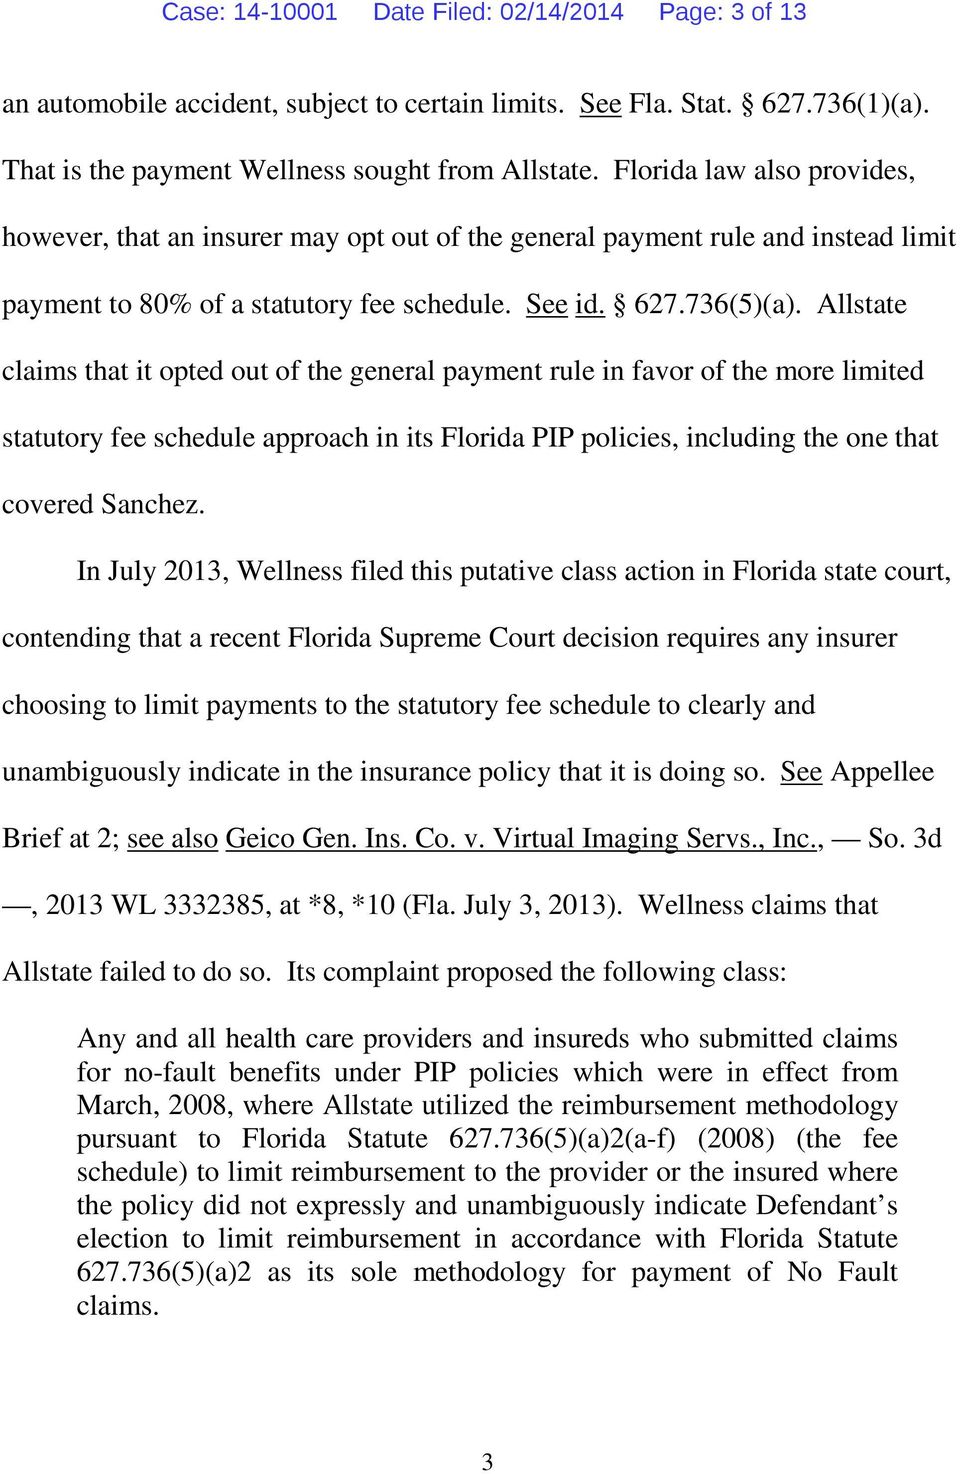 Allstate claims that it opted out of the general payment rule in favor of the more limited statutory fee schedule approach in its Florida PIP policies, including the one that covered Sanchez.